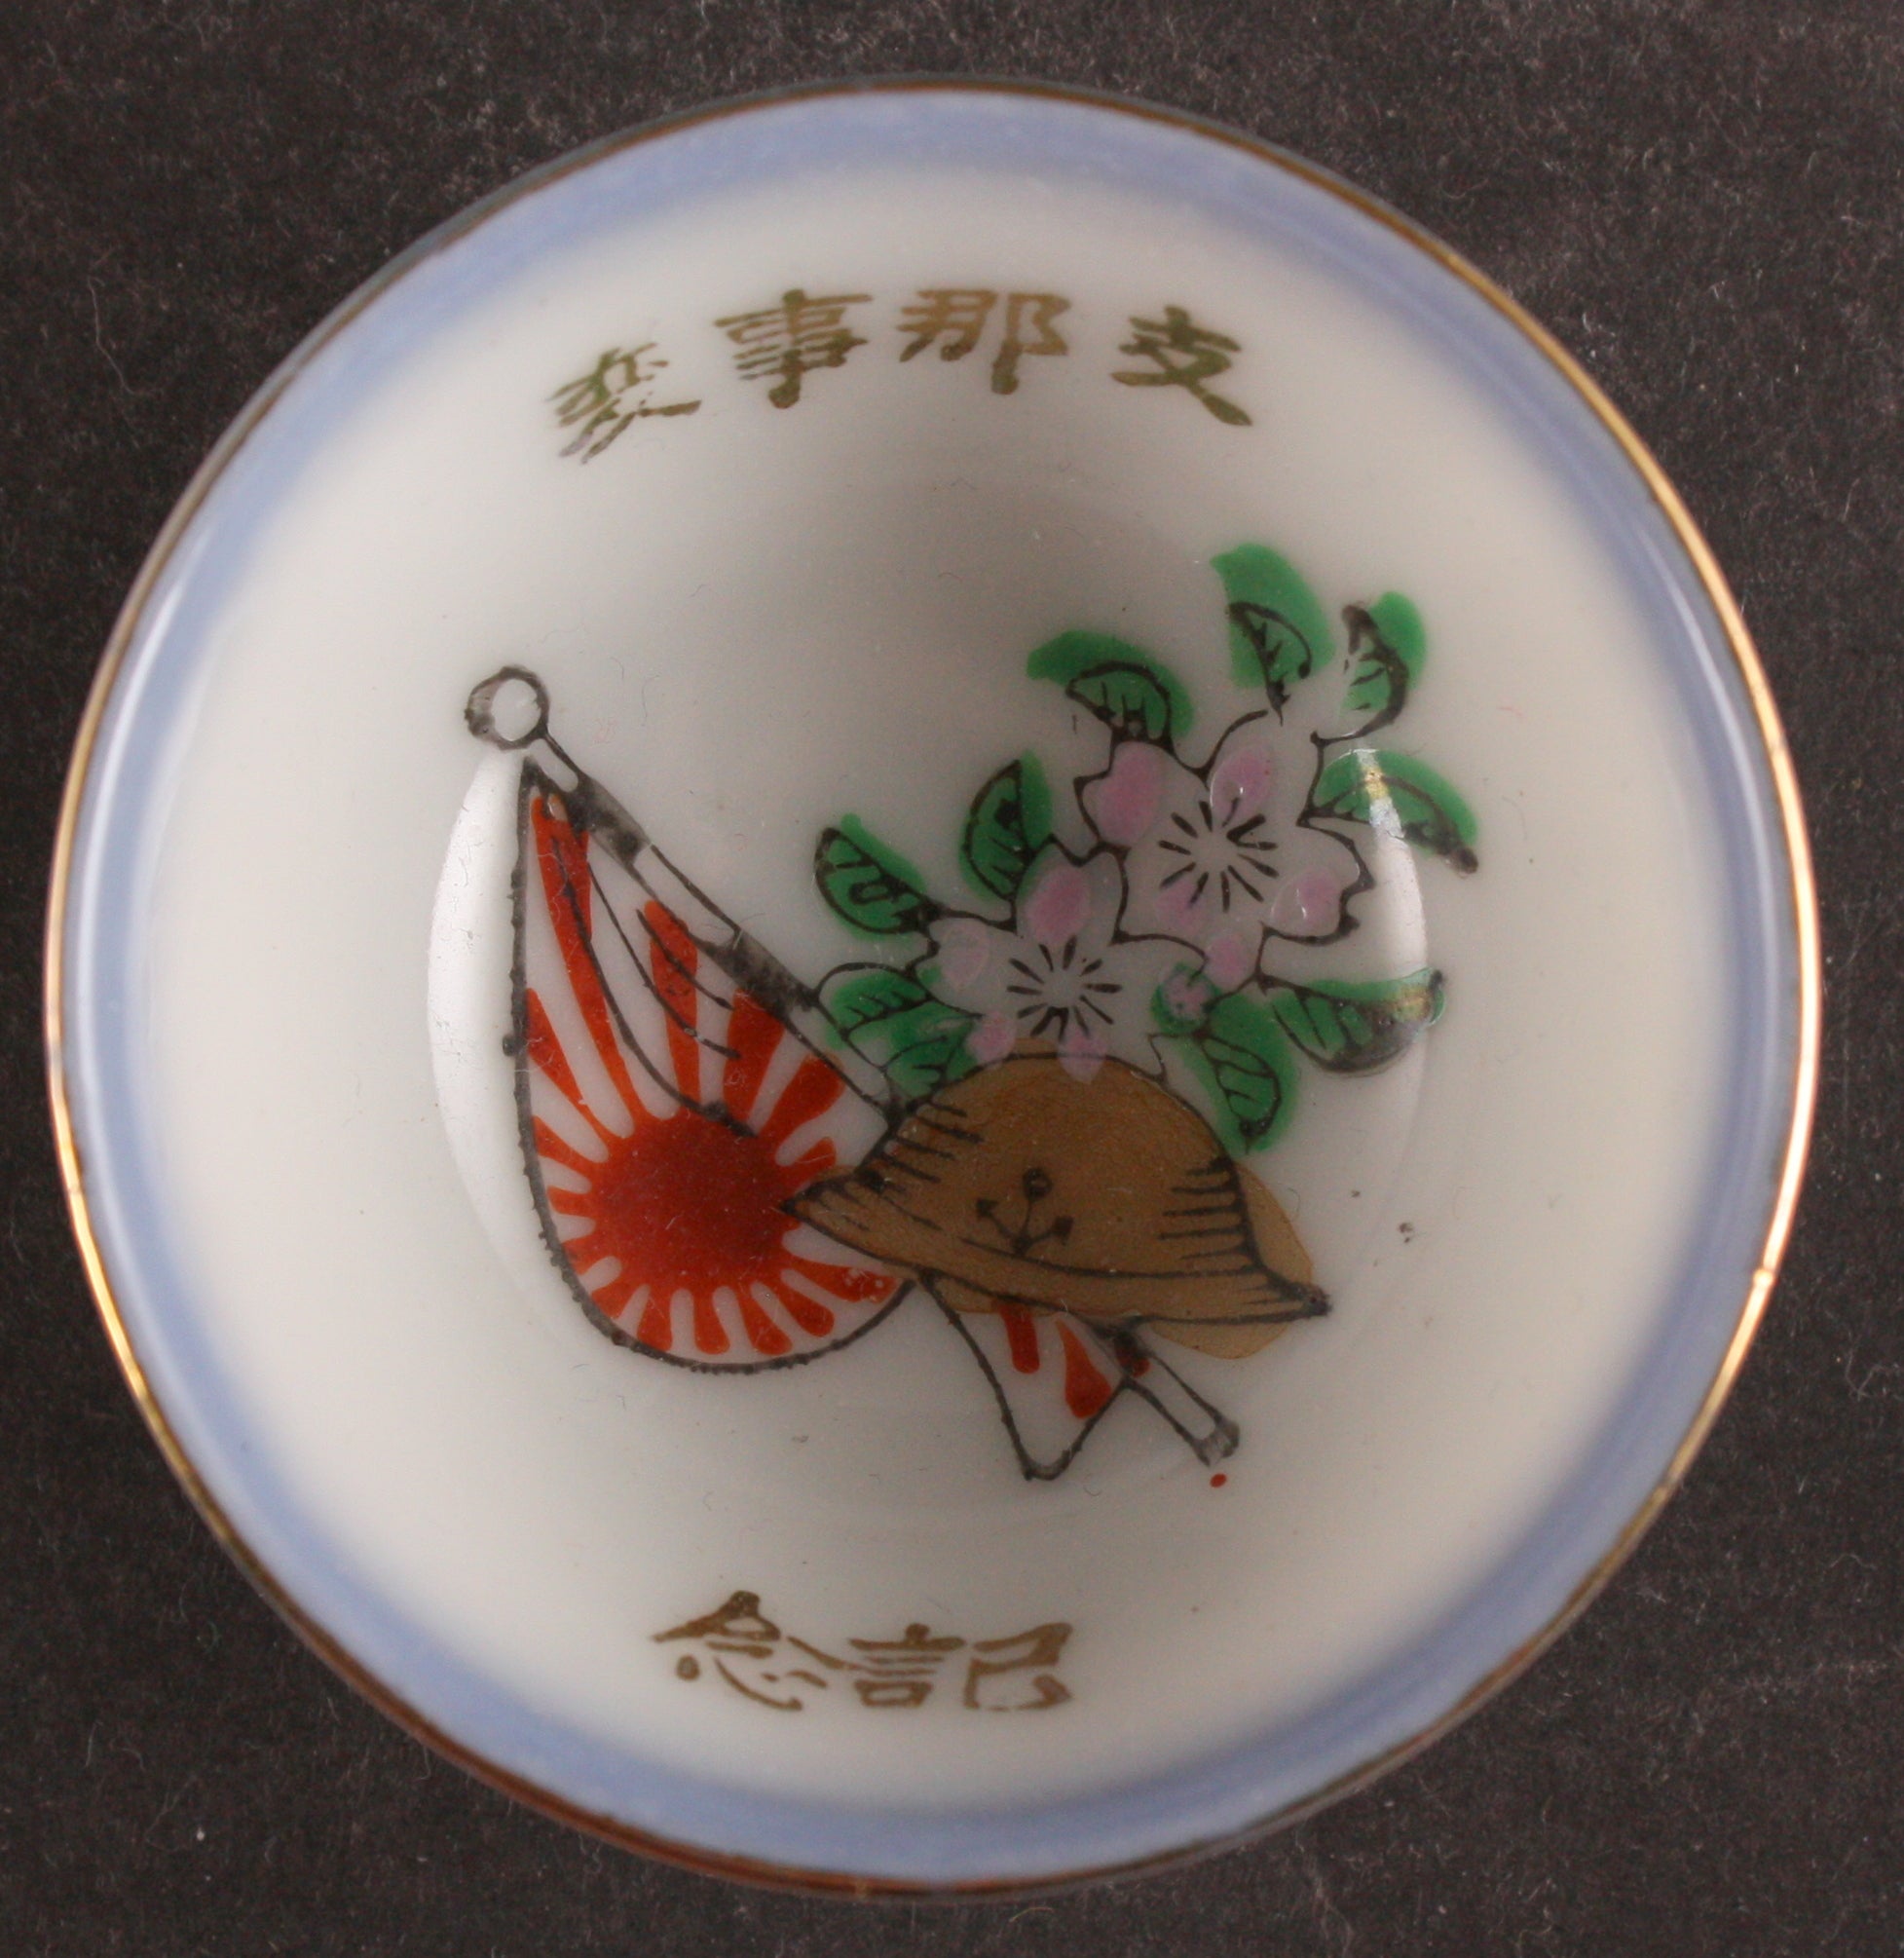 Rare Antique Japanese Military SNLF China Incident Navy Sake Cup